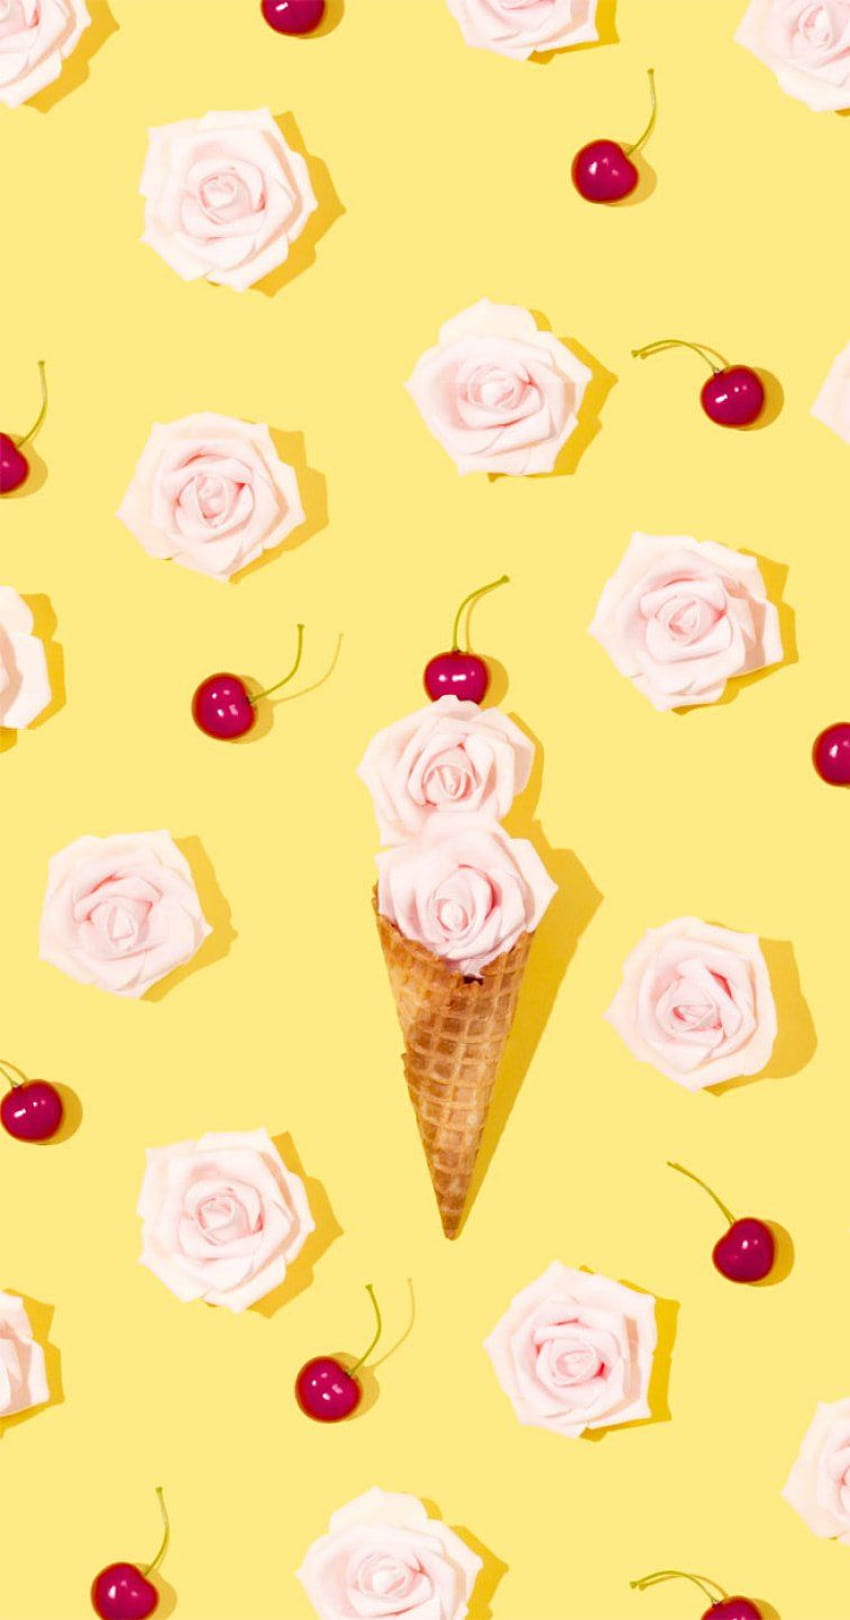 Ice cream cone and roses with cheerful yellow backgrounds HD phone wallpaper